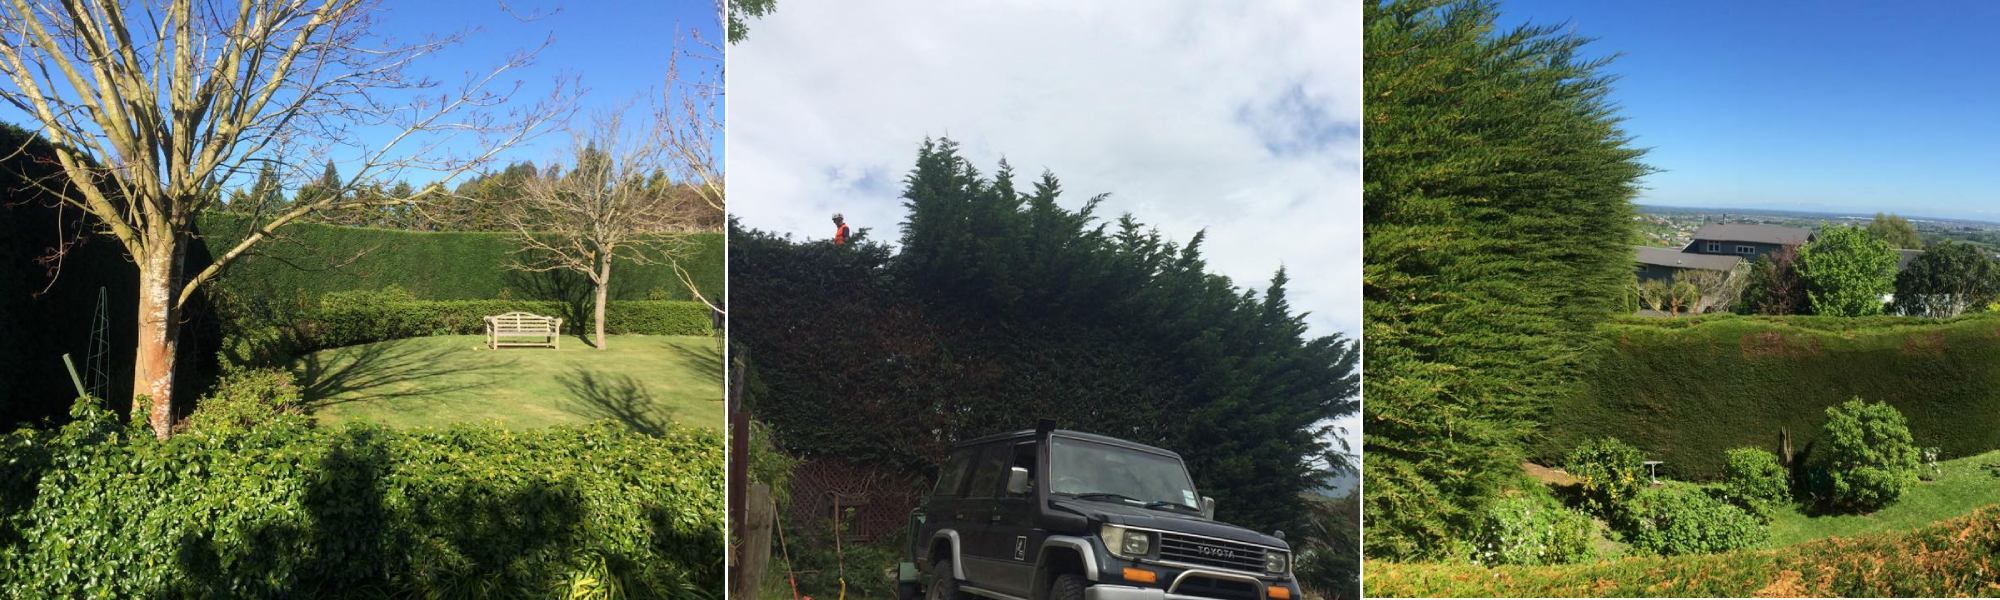 Specialist hedge & shelterbelt trimming Services in Christchurch and the wider Canterbury region. 